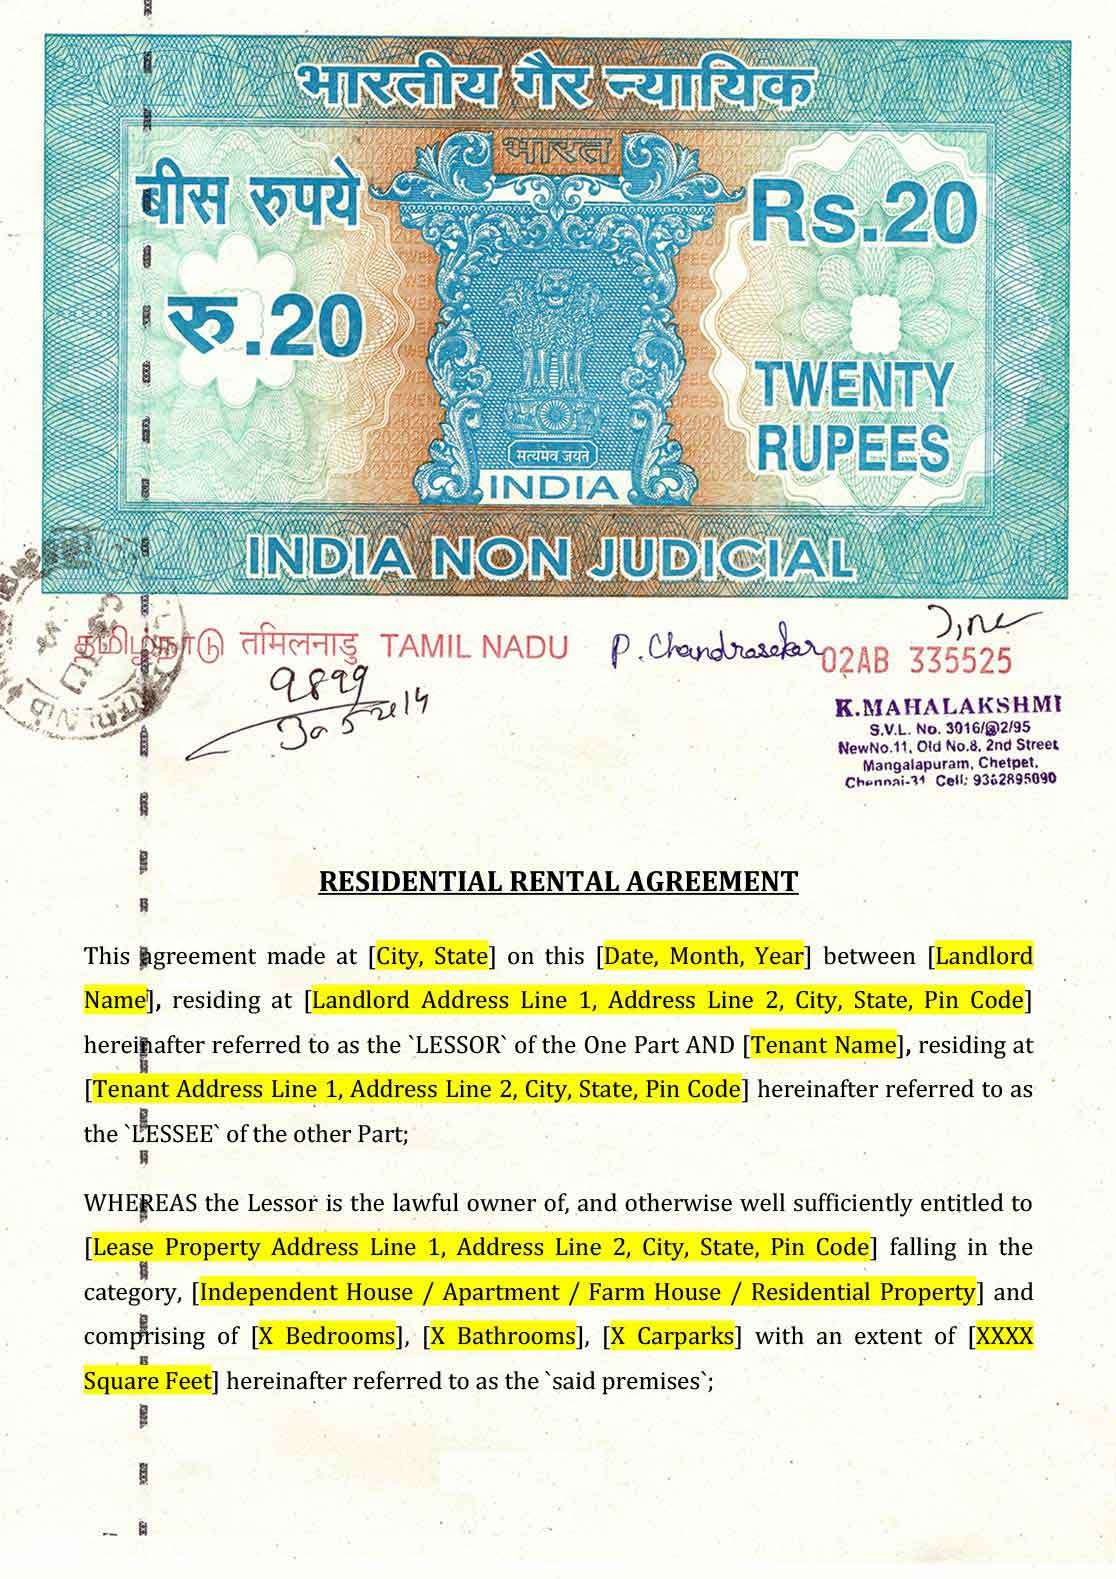 Copy Of A Lease Agreement For Residential Rental Agreement Format Indiafilings Document Center